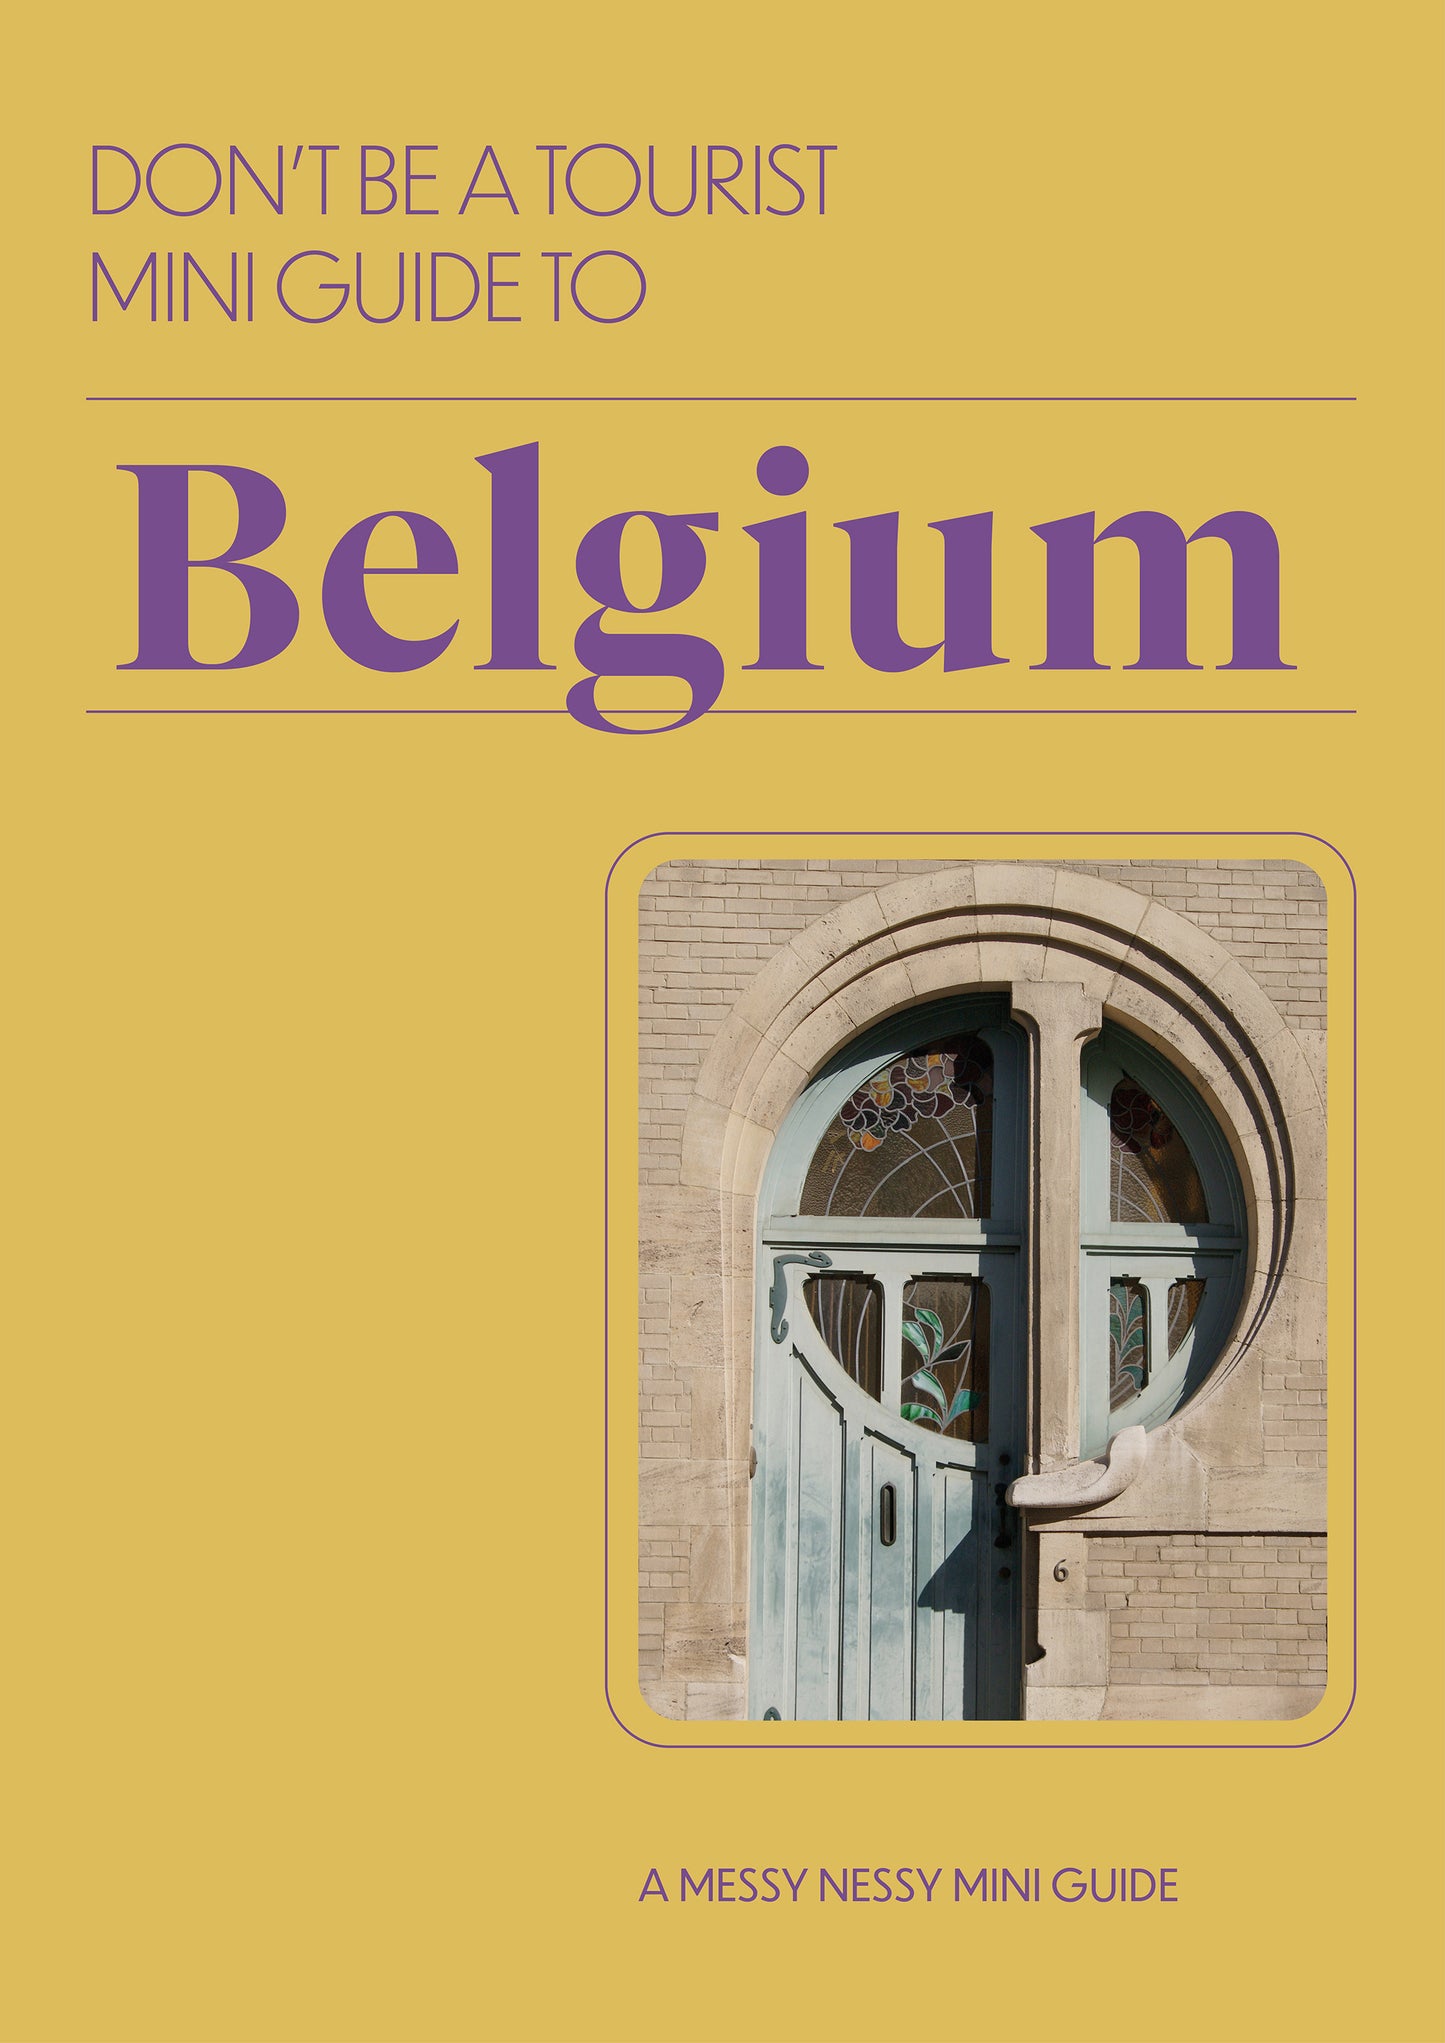 DON’T BE A TOURIST MINI GUIDE TO BELGIUM